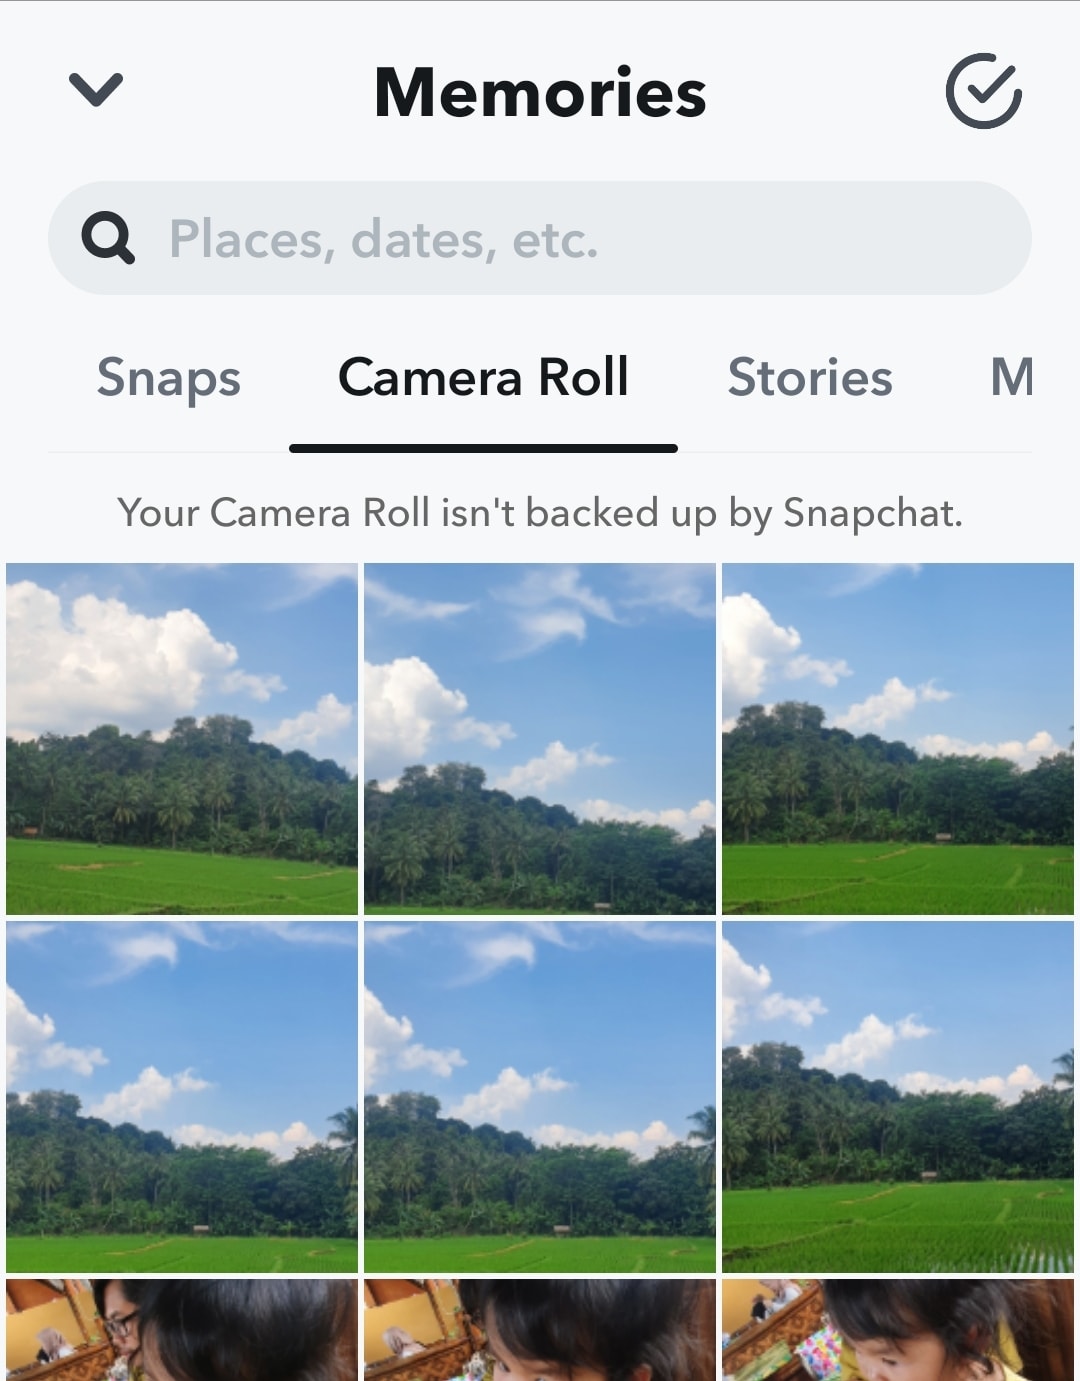 loading pictures from camera roll to snapchat